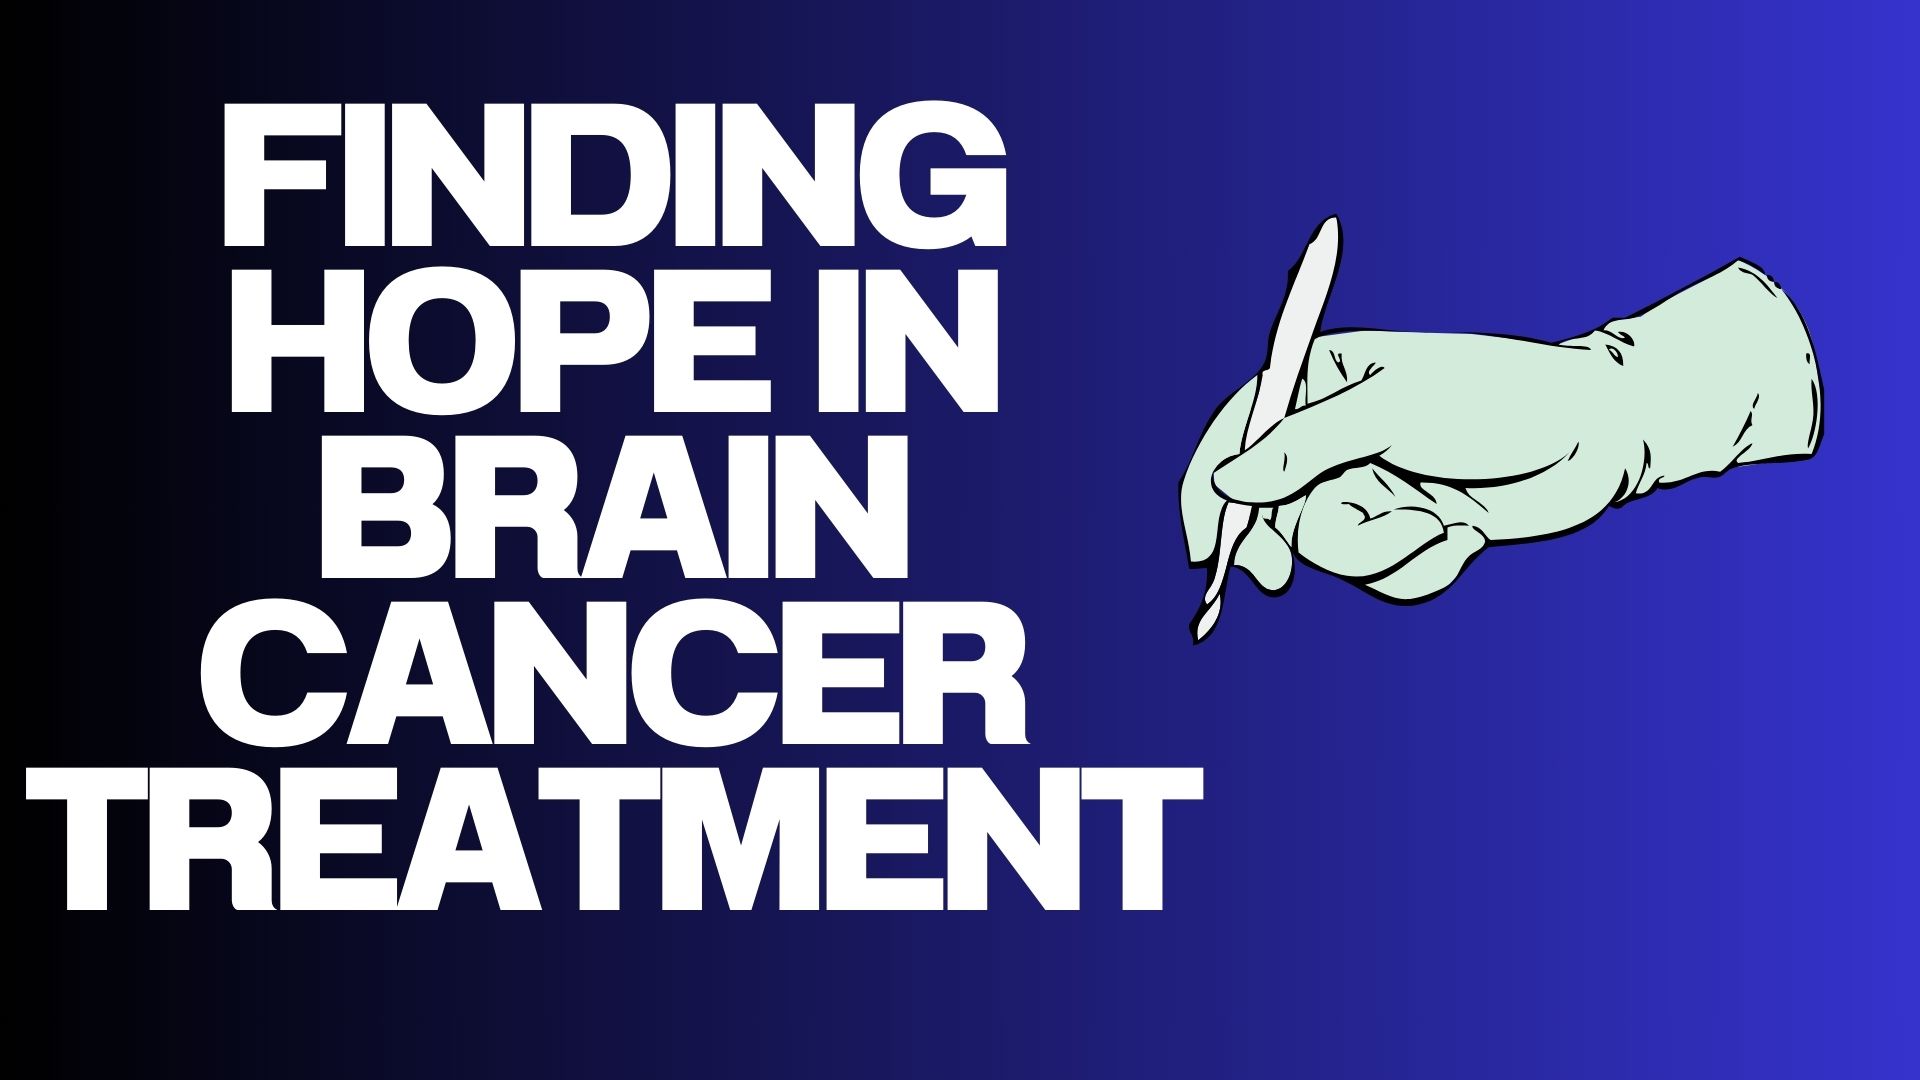 Finding Hope in Brain Cancer Treatment